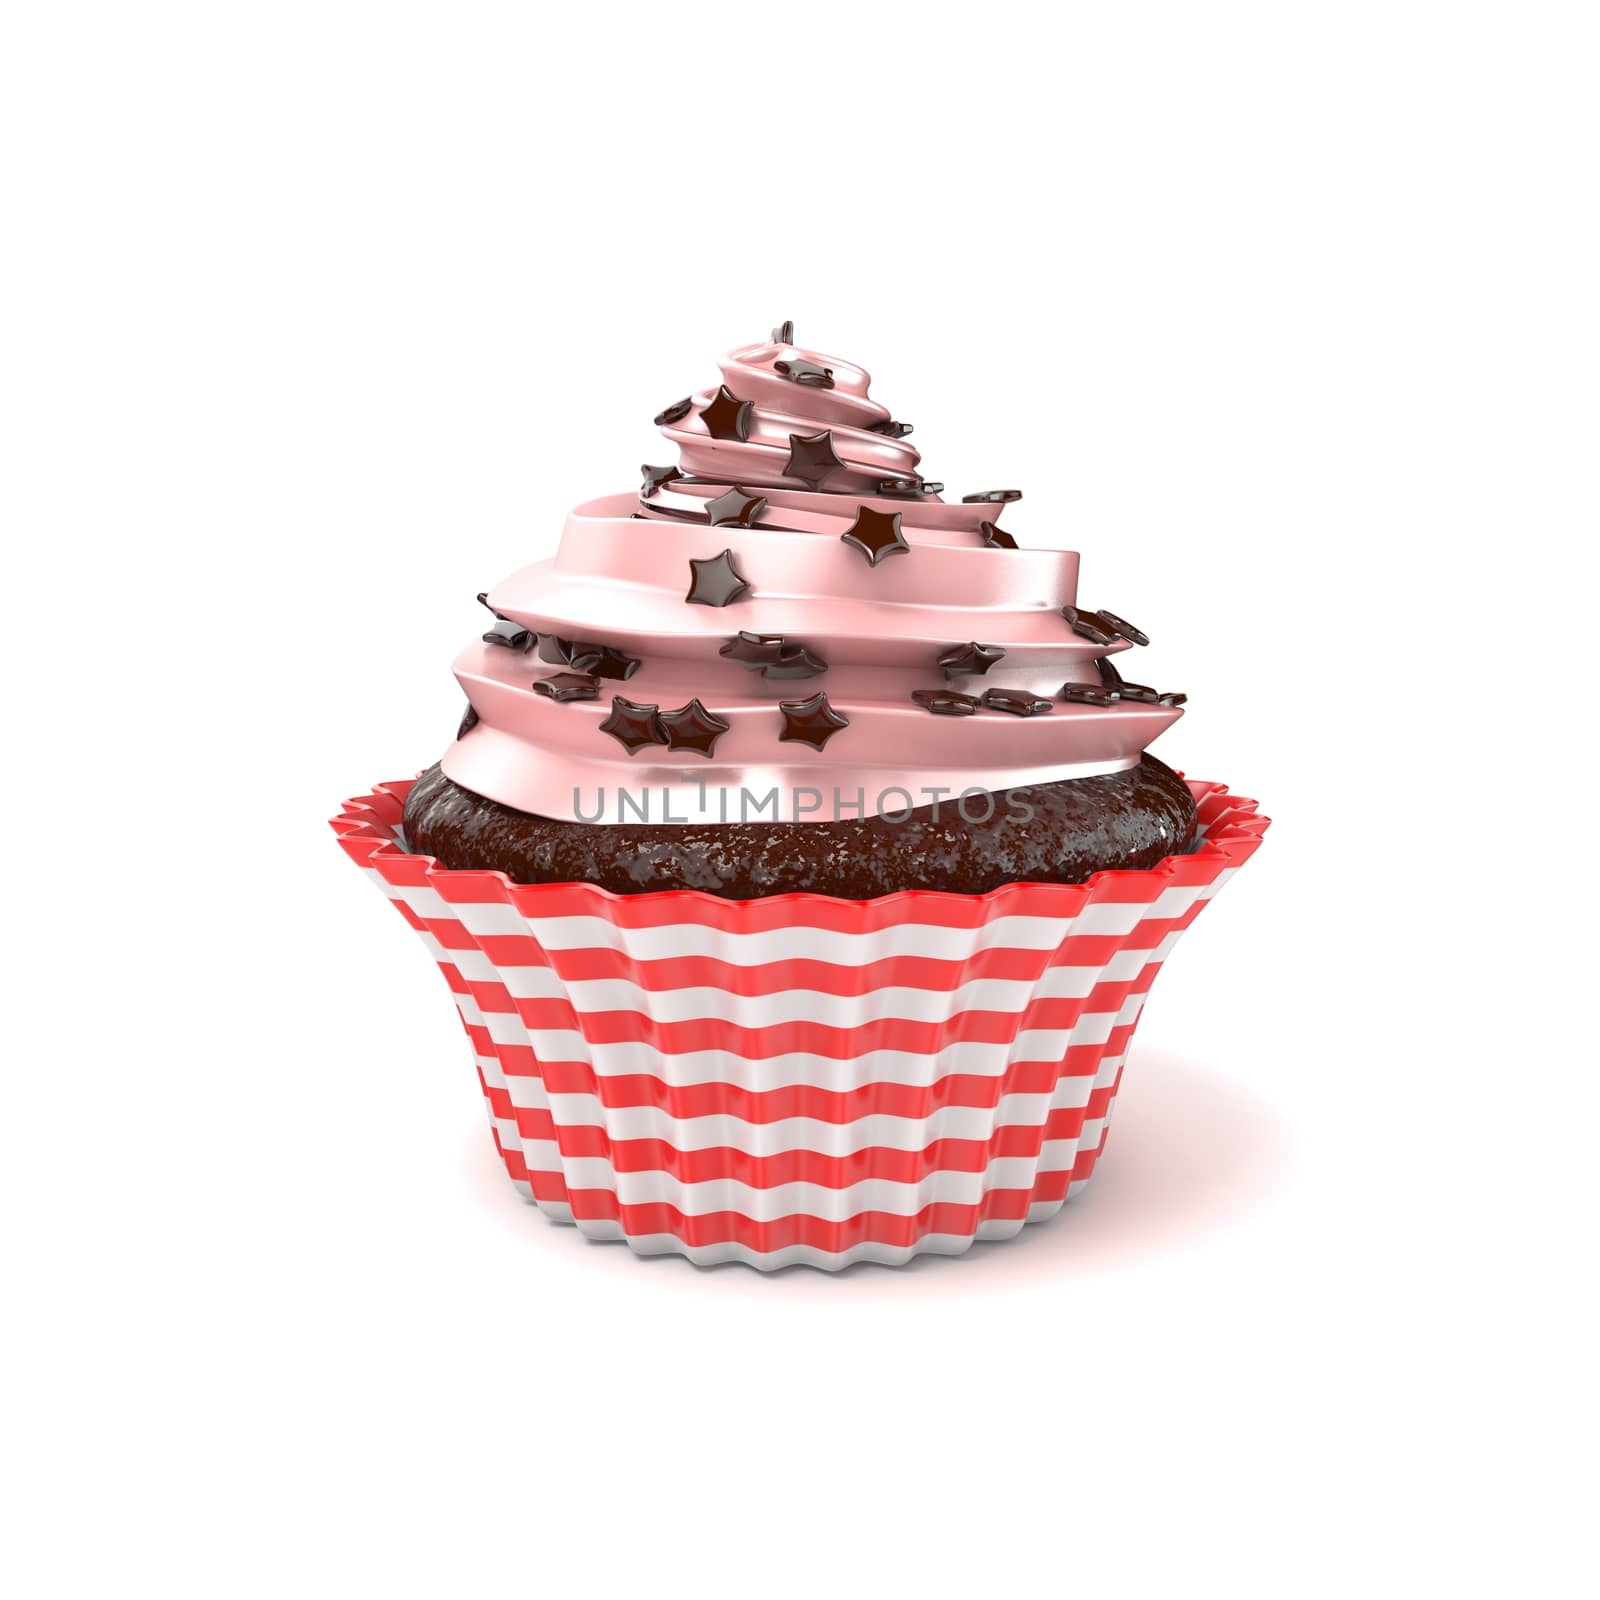 Cupcake. 3D render illustration isolated on white background